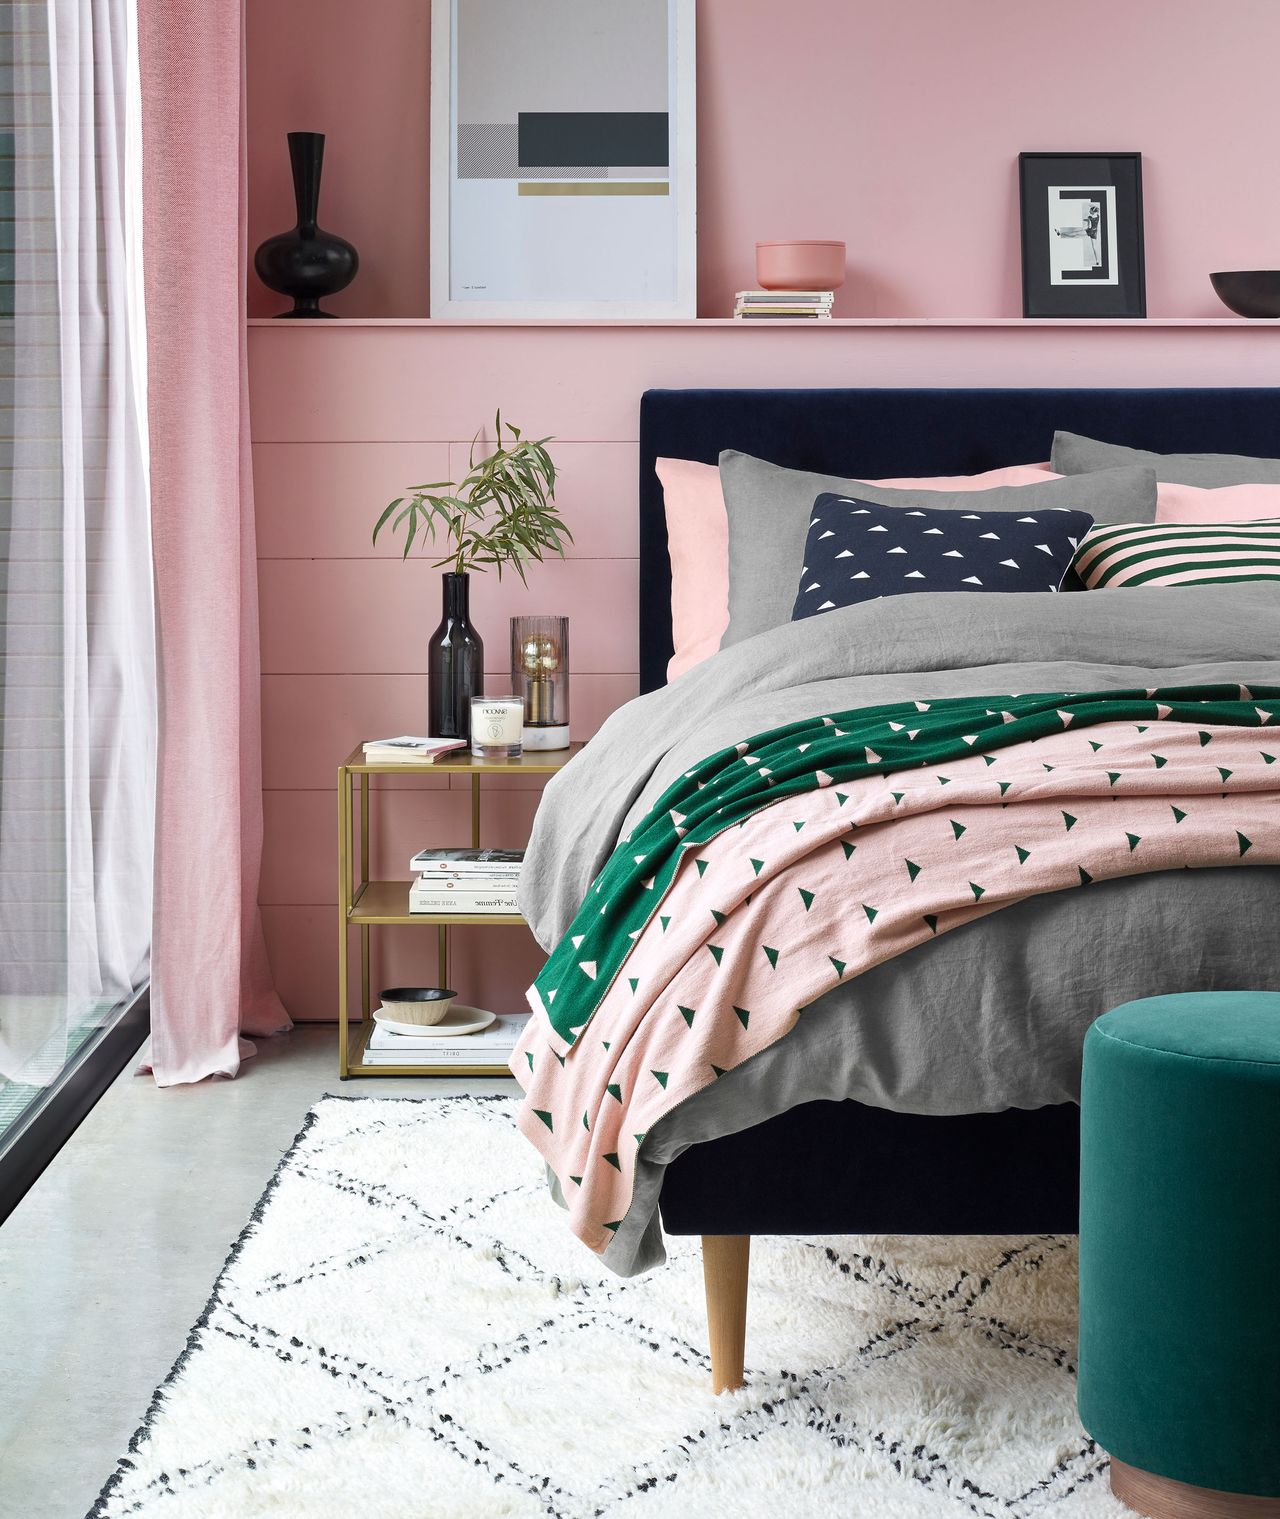 5 playful ways to decorate with blush pink | Real Homes